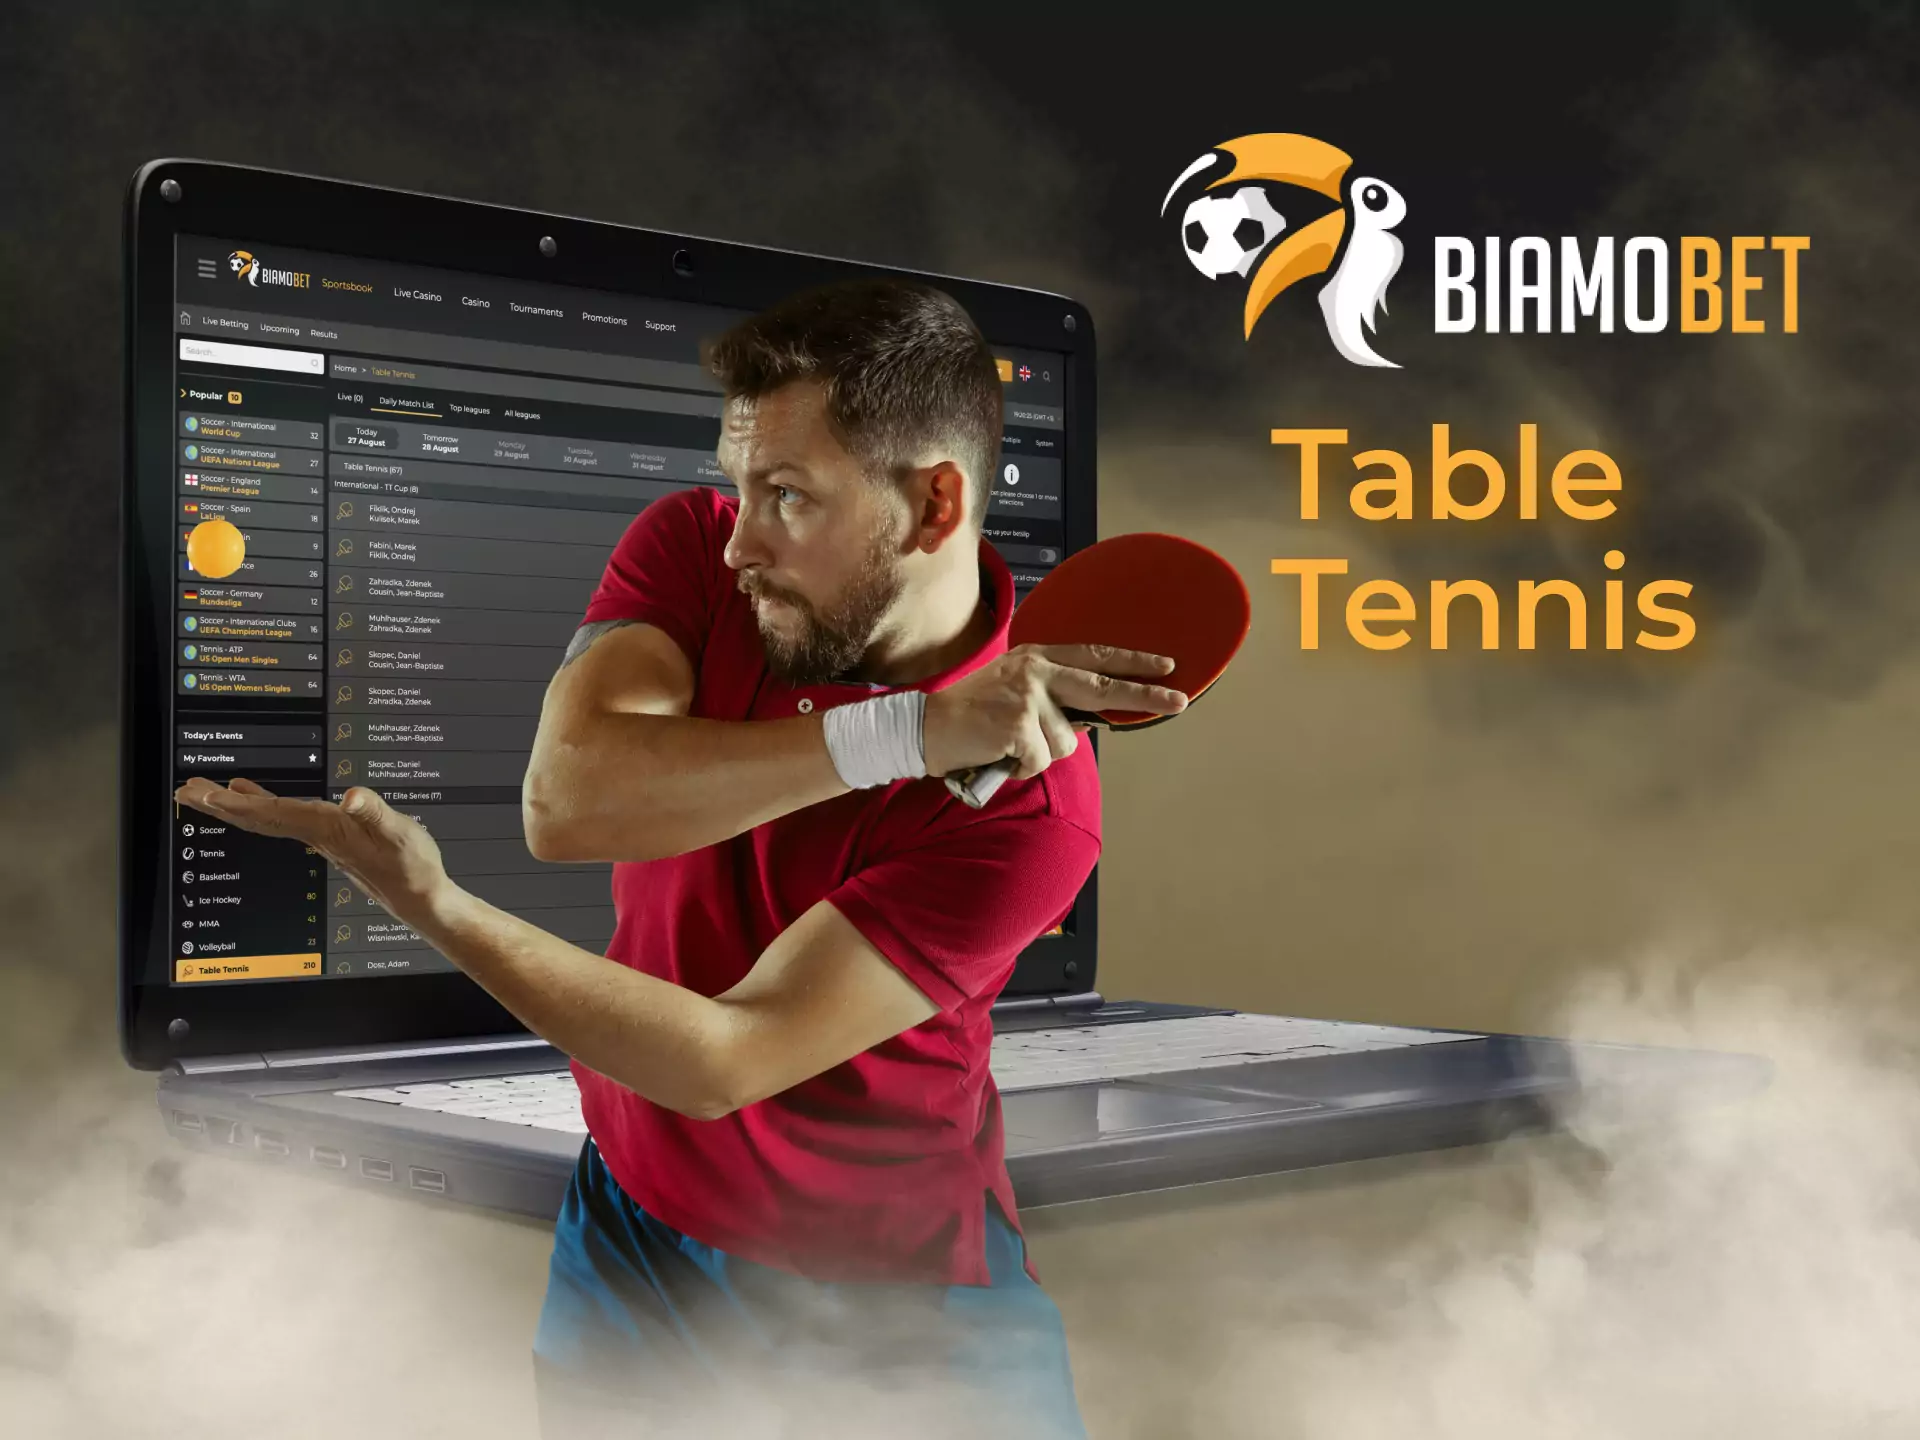 You can place a bet on table tennis matches on Biamobet.